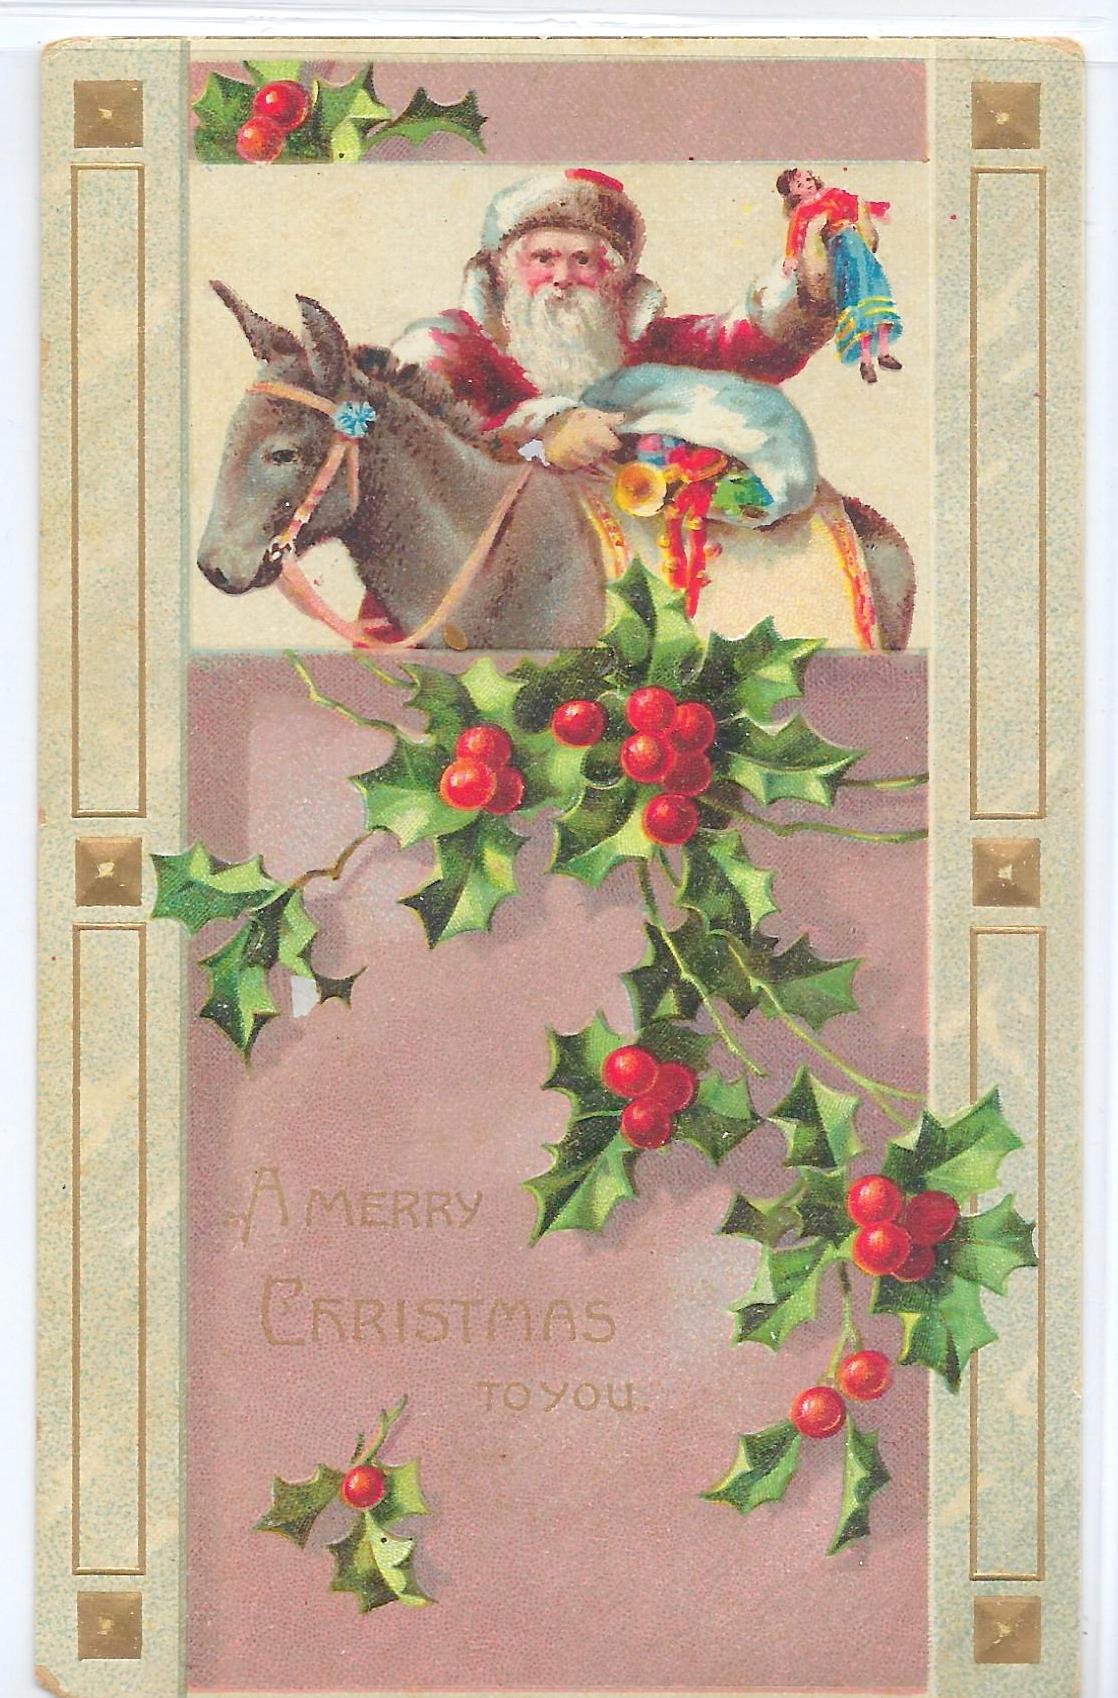 Christmas Postcard Embossed Card Santa Claus with Donkey Holly Front Gold Highlighted Border Printed in Germany